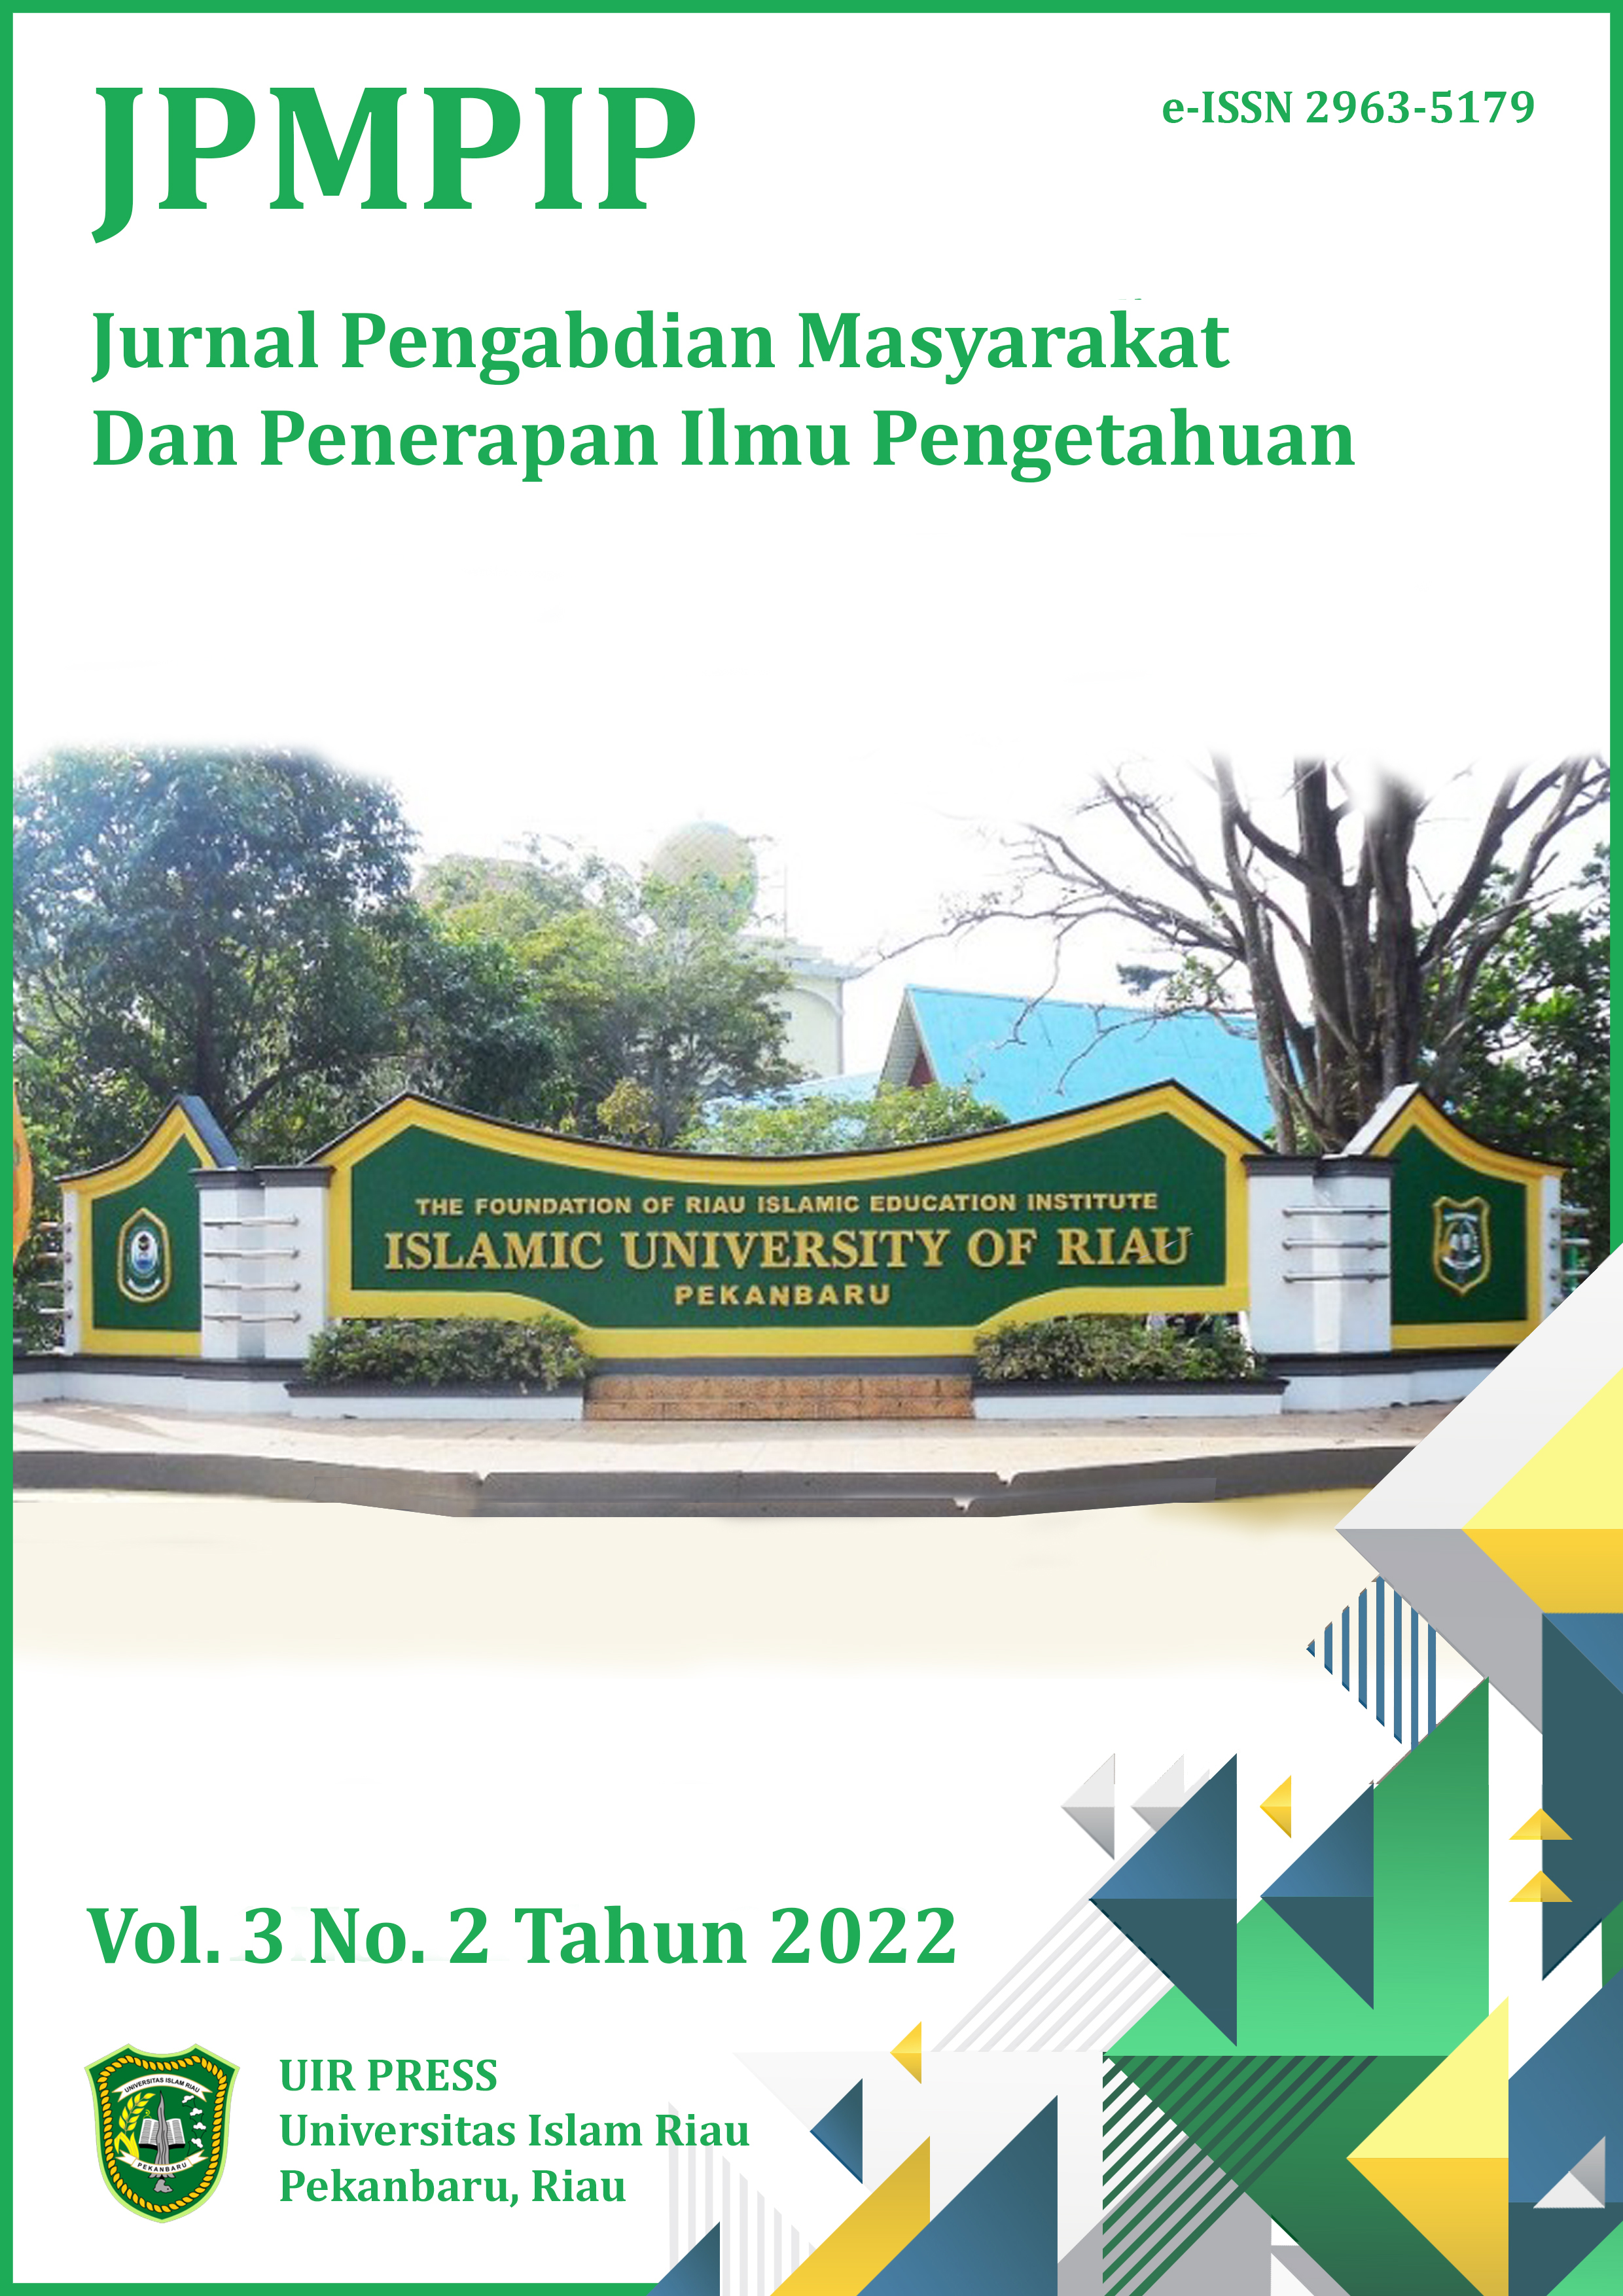 Issue Cover JPMPIP Vol. 3 No. 2 2022